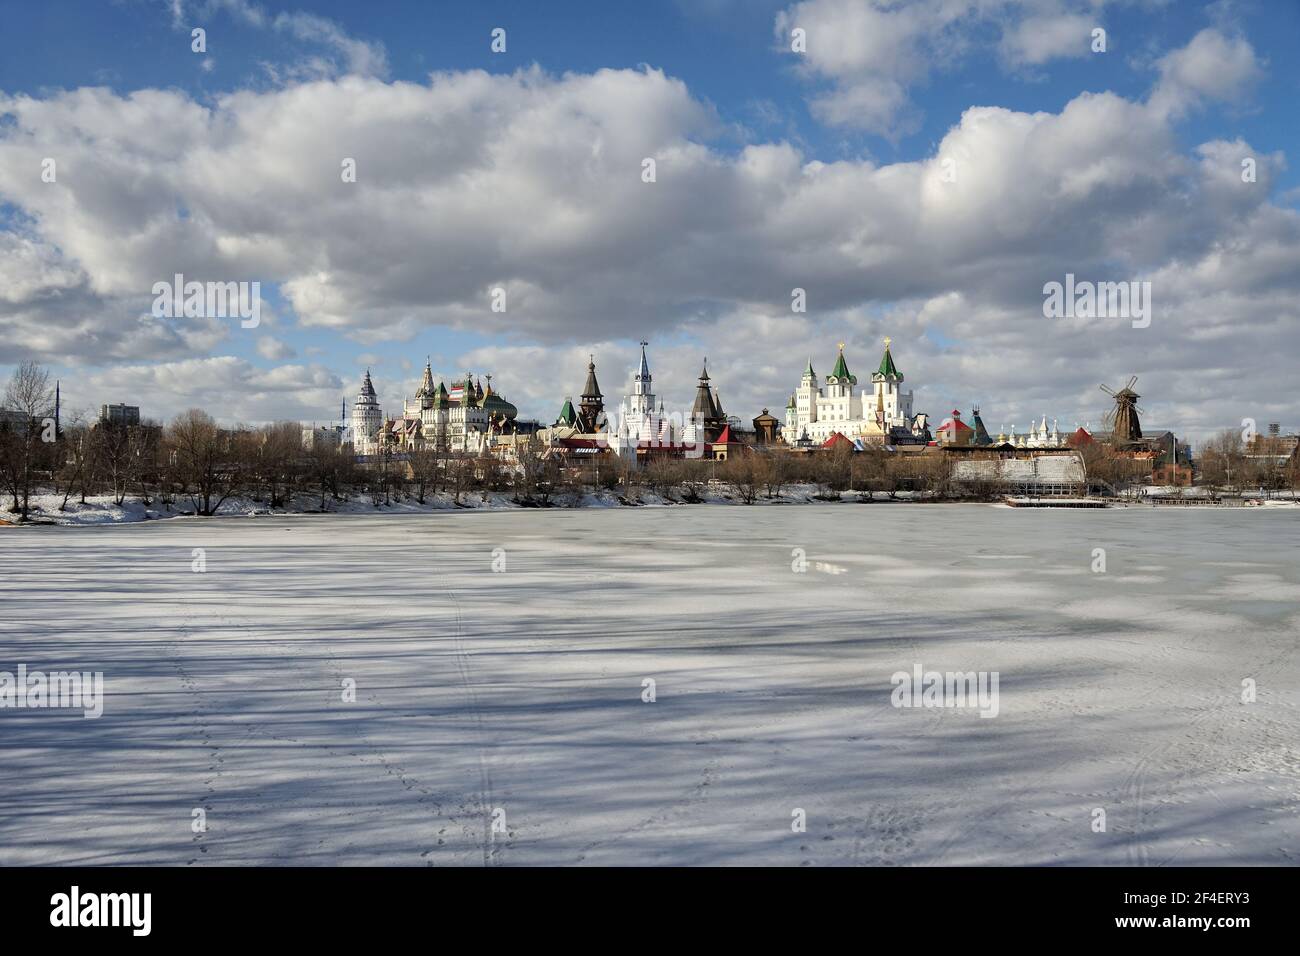 = Frozen Izmailovo Ponds and Kremlin in Early Spring =  View from a small pedestrian bridge on the frozen Izmailovo ponds and beautiful architectural Stock Photo